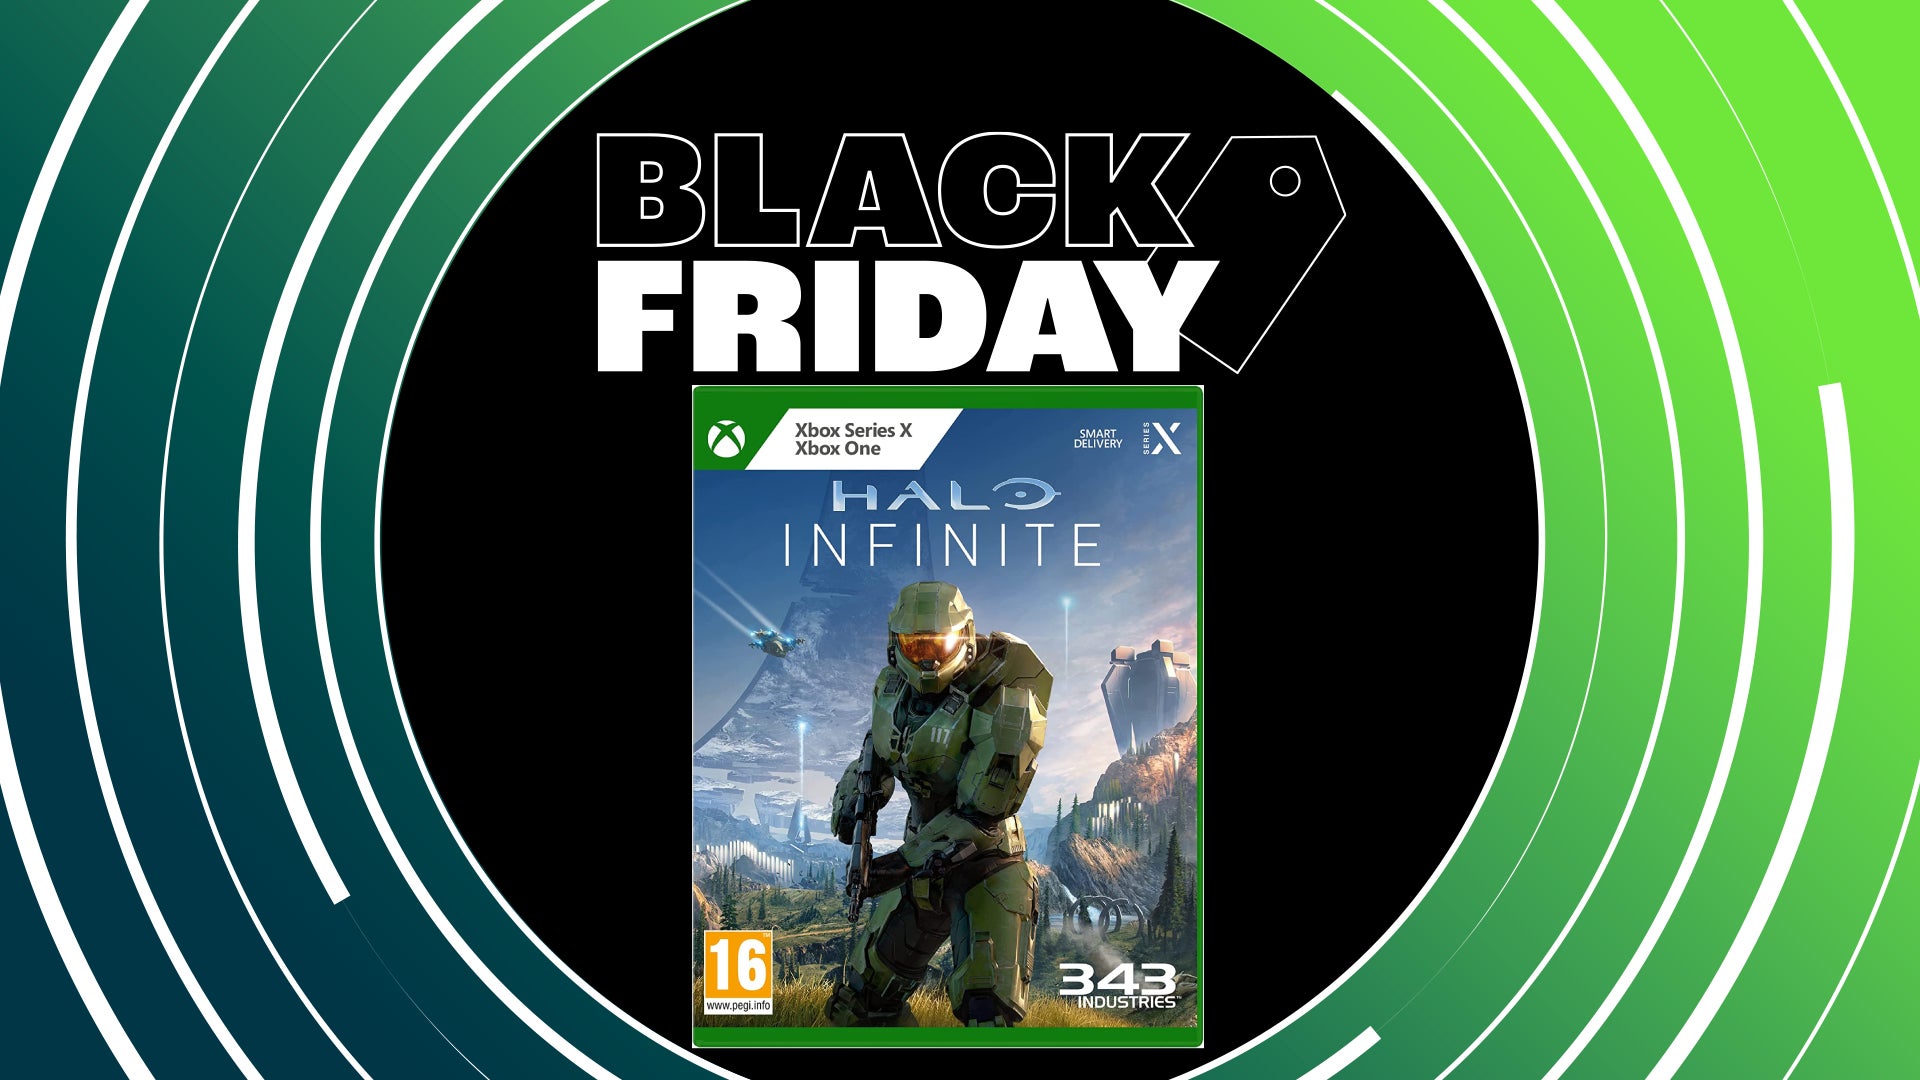 Image for Grab a physical copy of Halo Infinite for just £15 at Amazon this Black Friday